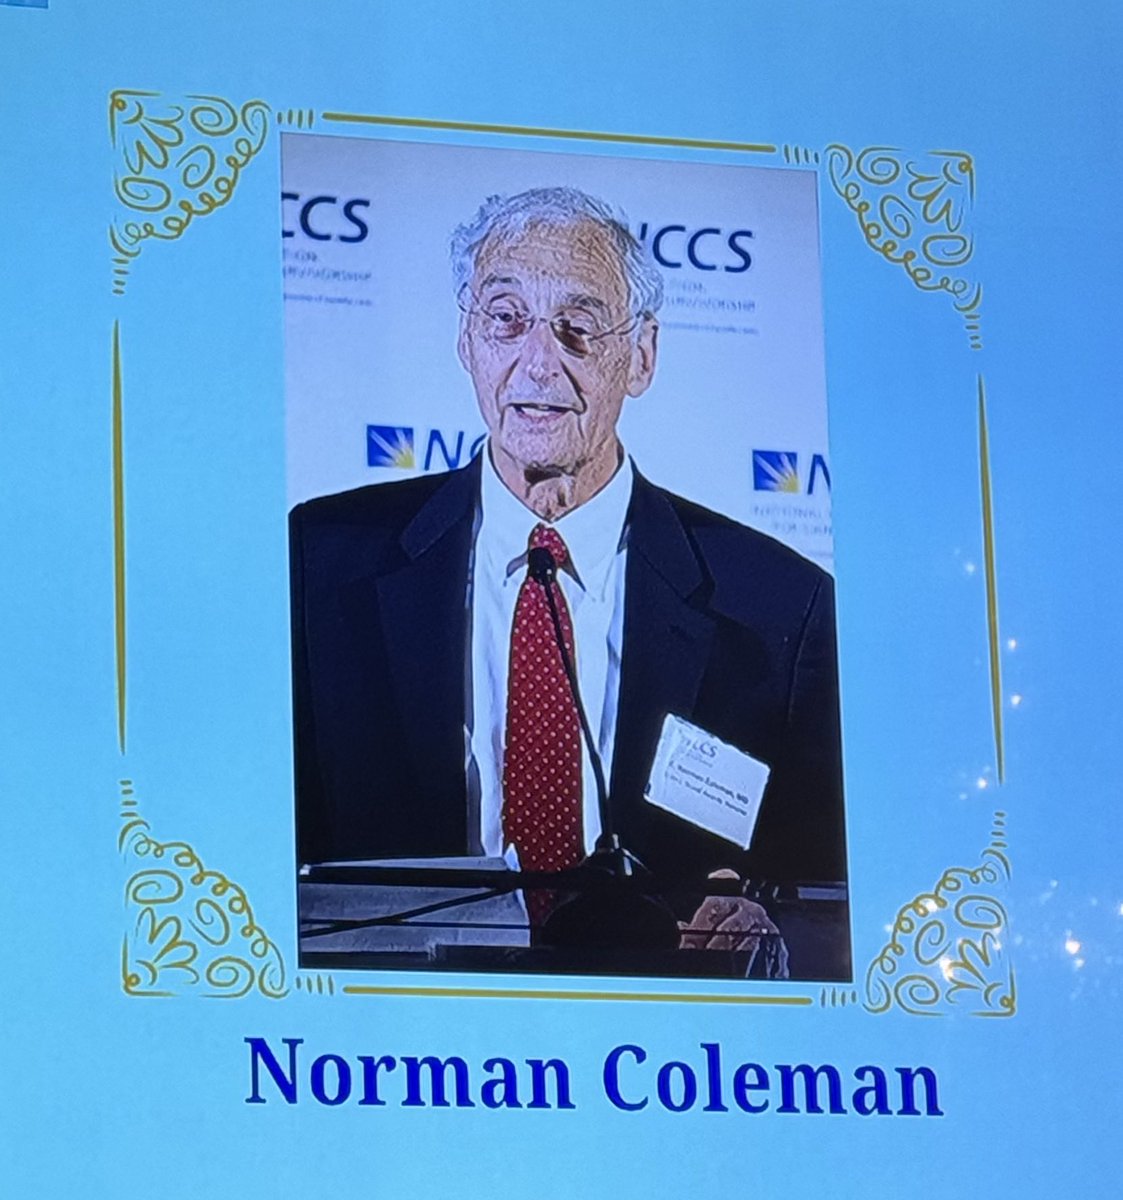 Moving tribute by @maryacoffey remembering Dr Norman Coleman from @theNCI at Joint Euro-American Forum on Cancer at @farmleighOPW this morning Recalls his friendship and leadership to the #radiationoncology community in #Ireland and across the 🌍 but most of all his kindness